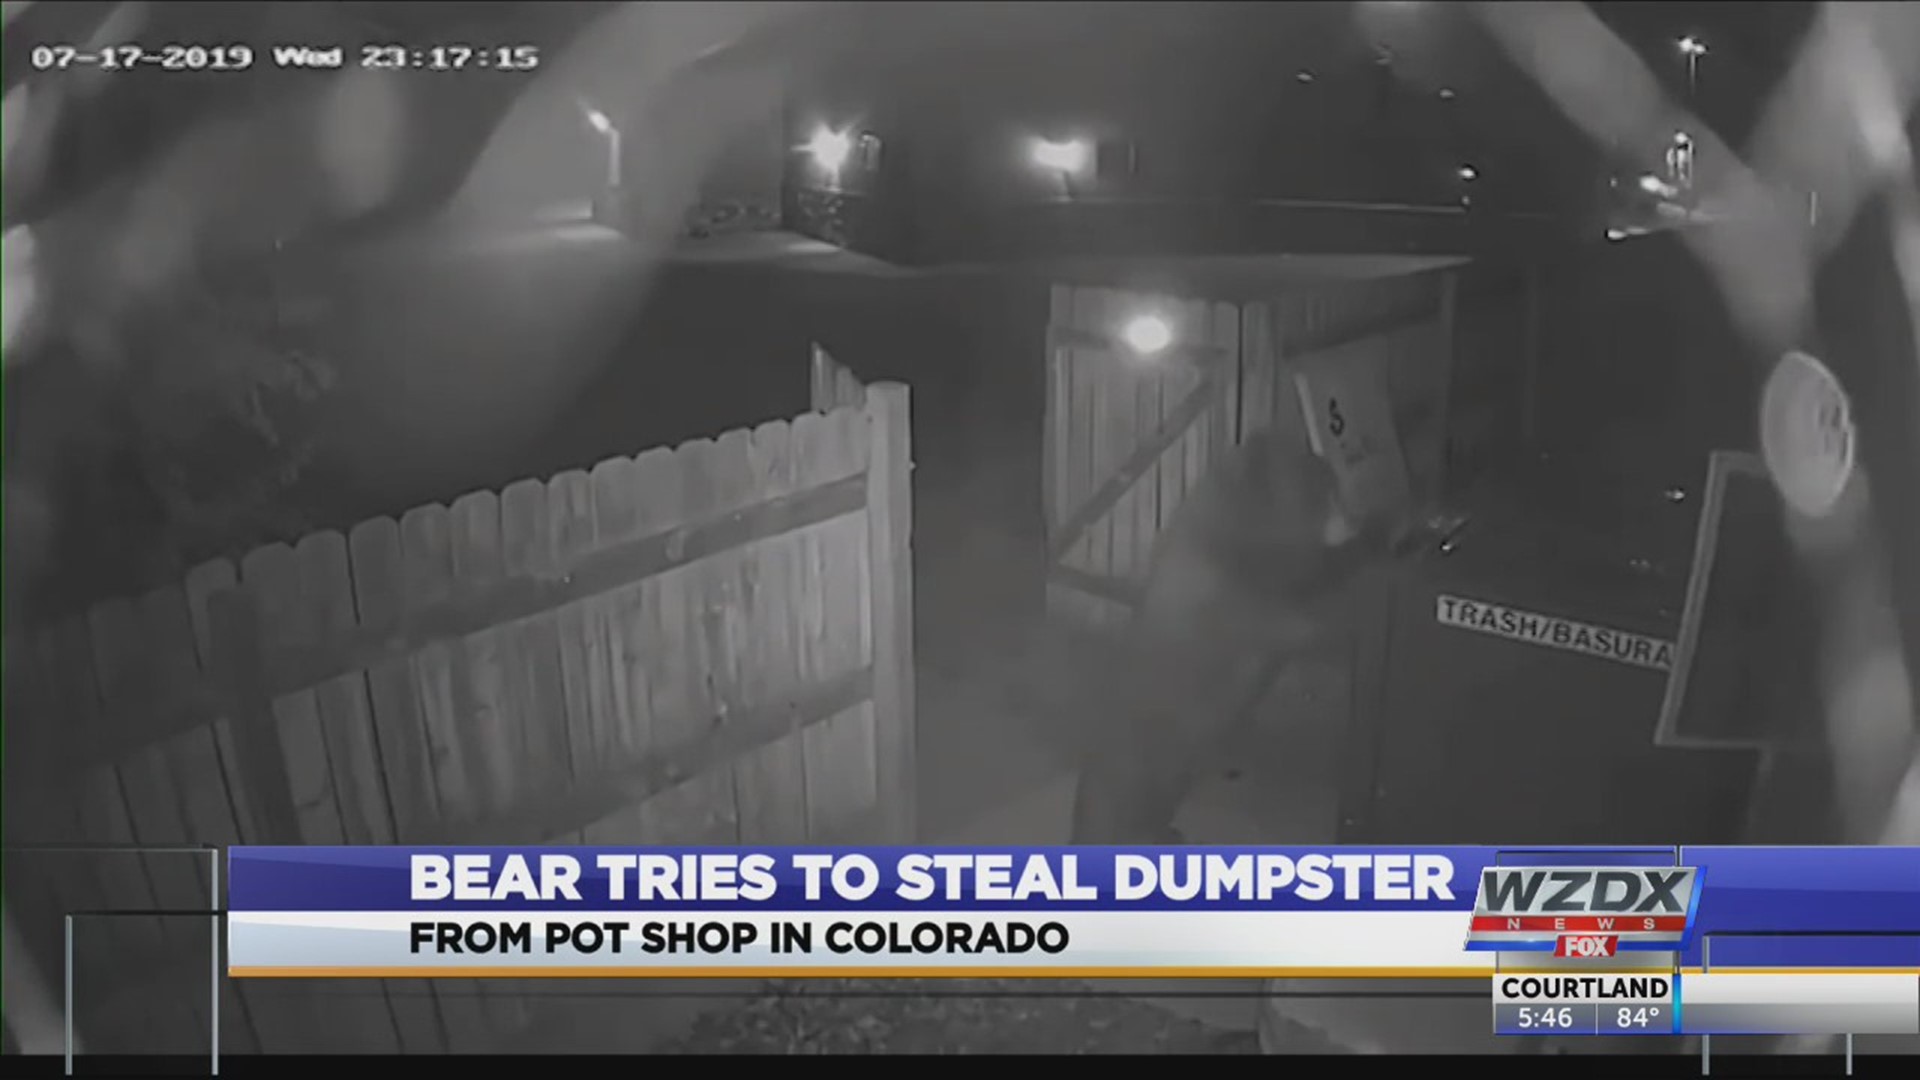 A bear entered the trash area behind a marijuana dispensary in Colorado and discovers a holy grail of temptation... a trash dumpster.